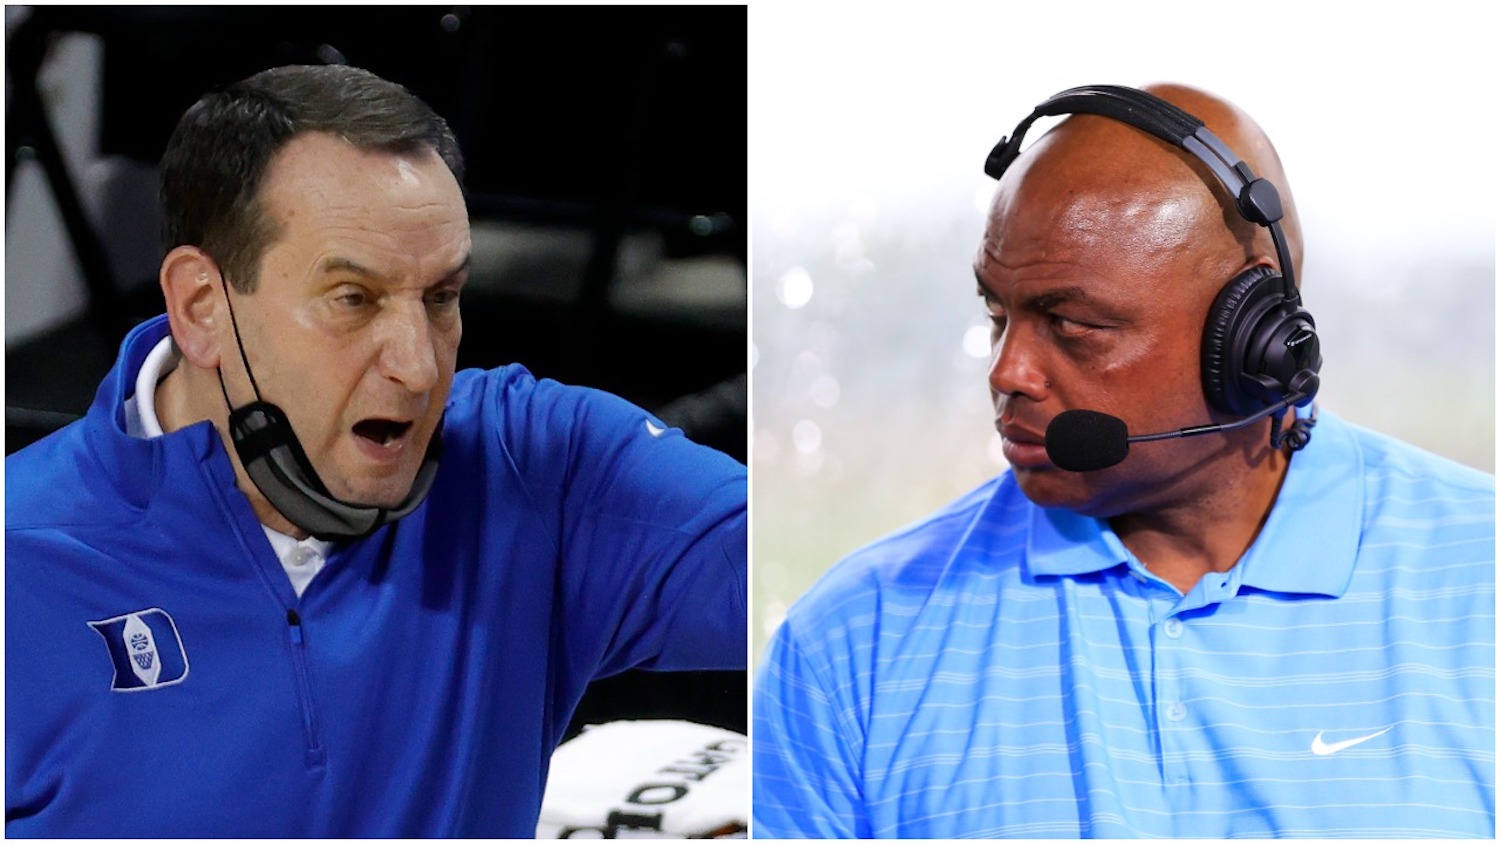 Coach K (L) and Charles Barkley (R) had a spent the summer of 1992 together as members of the Dream Team.